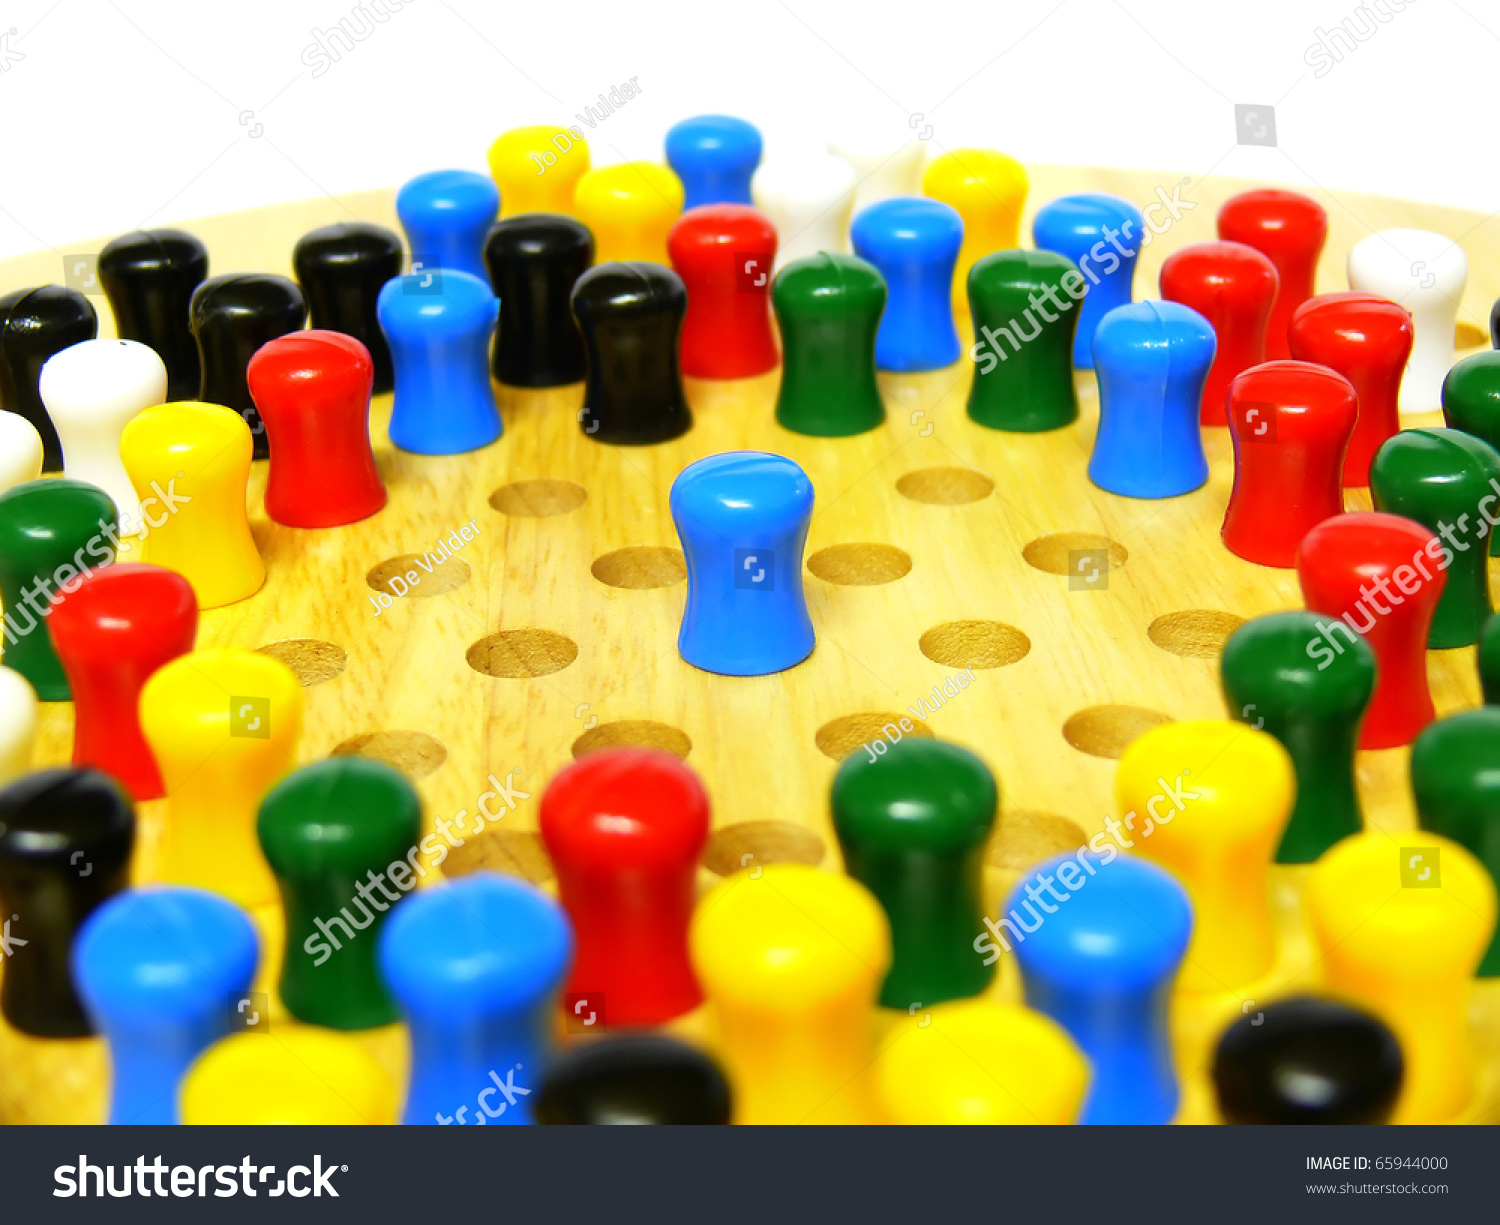 A blue peg on a chinese checkers board conceptually depicting being singled out, being alone #65944000